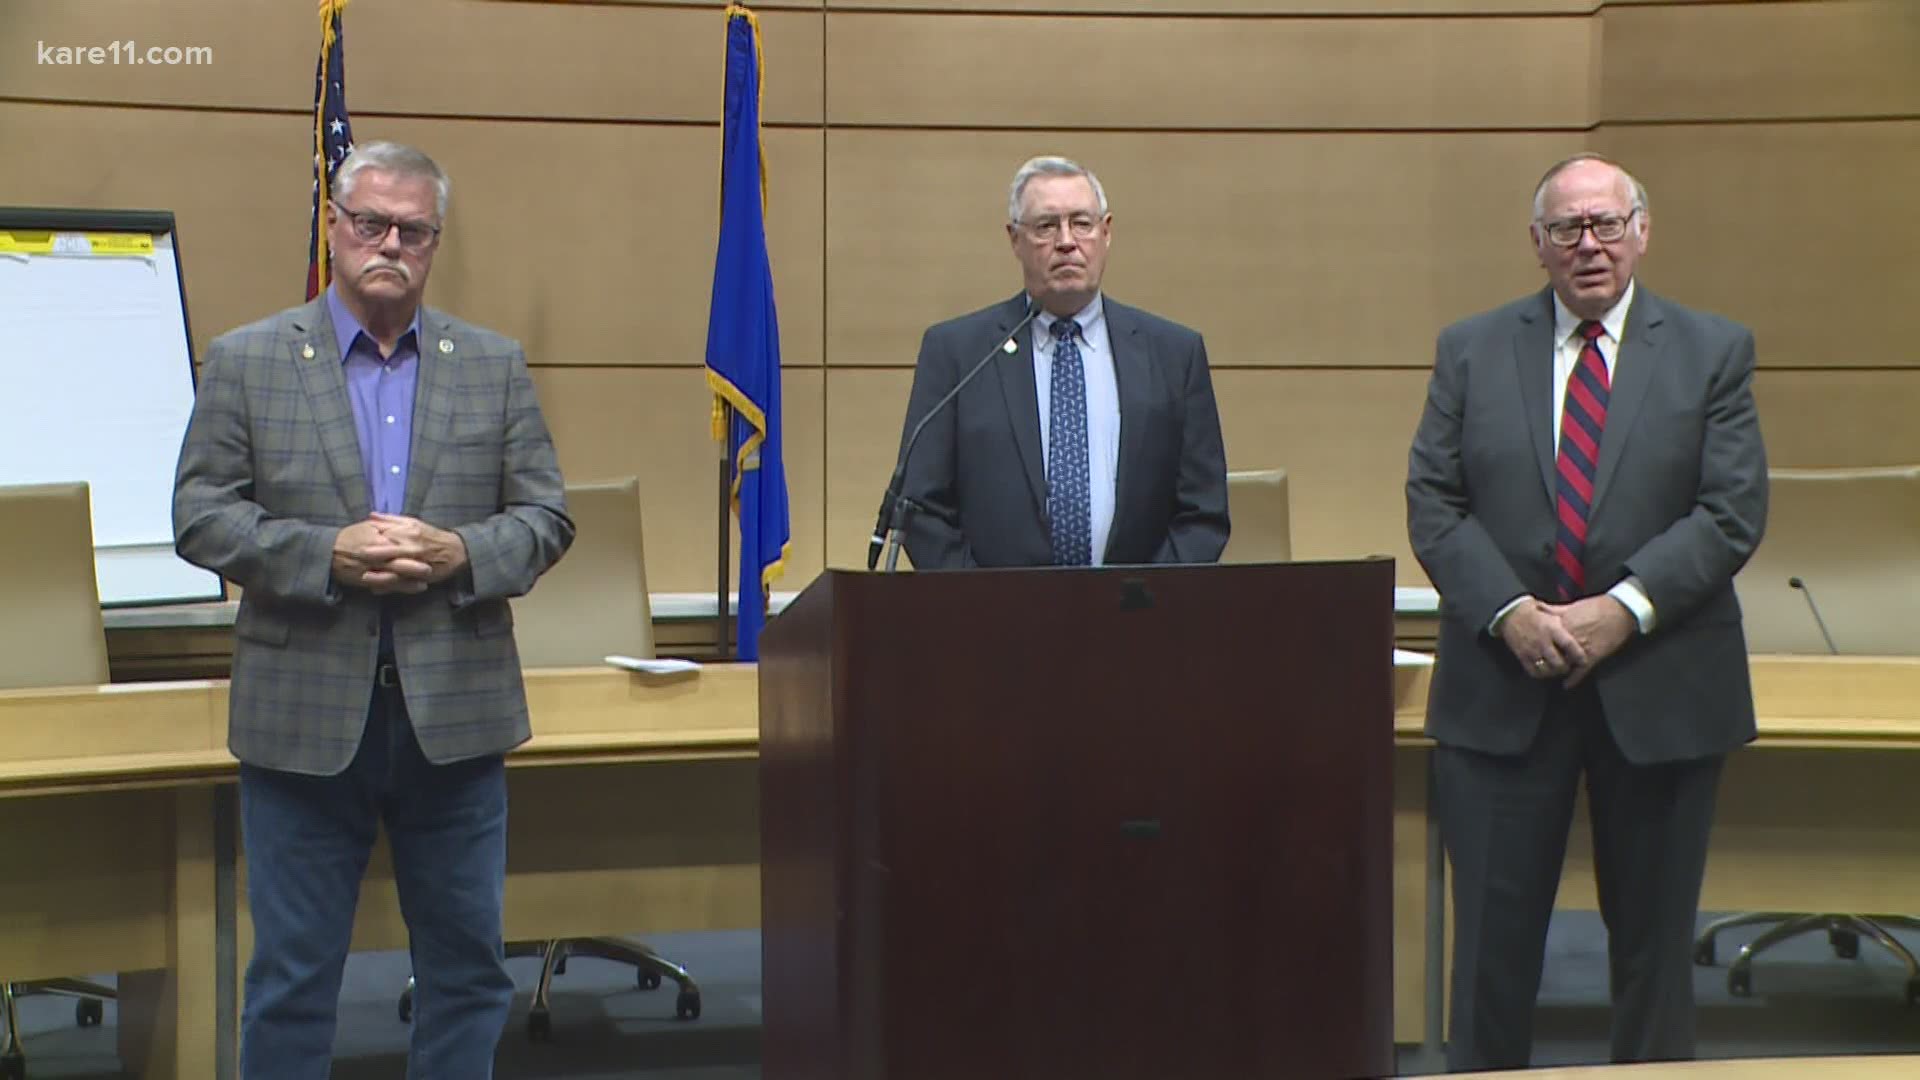 Trio of Republican state senators asked US Atty Gen William Barr to investigate alleged racial discrimination in the Minneapolis PD. They say state can't be fair.